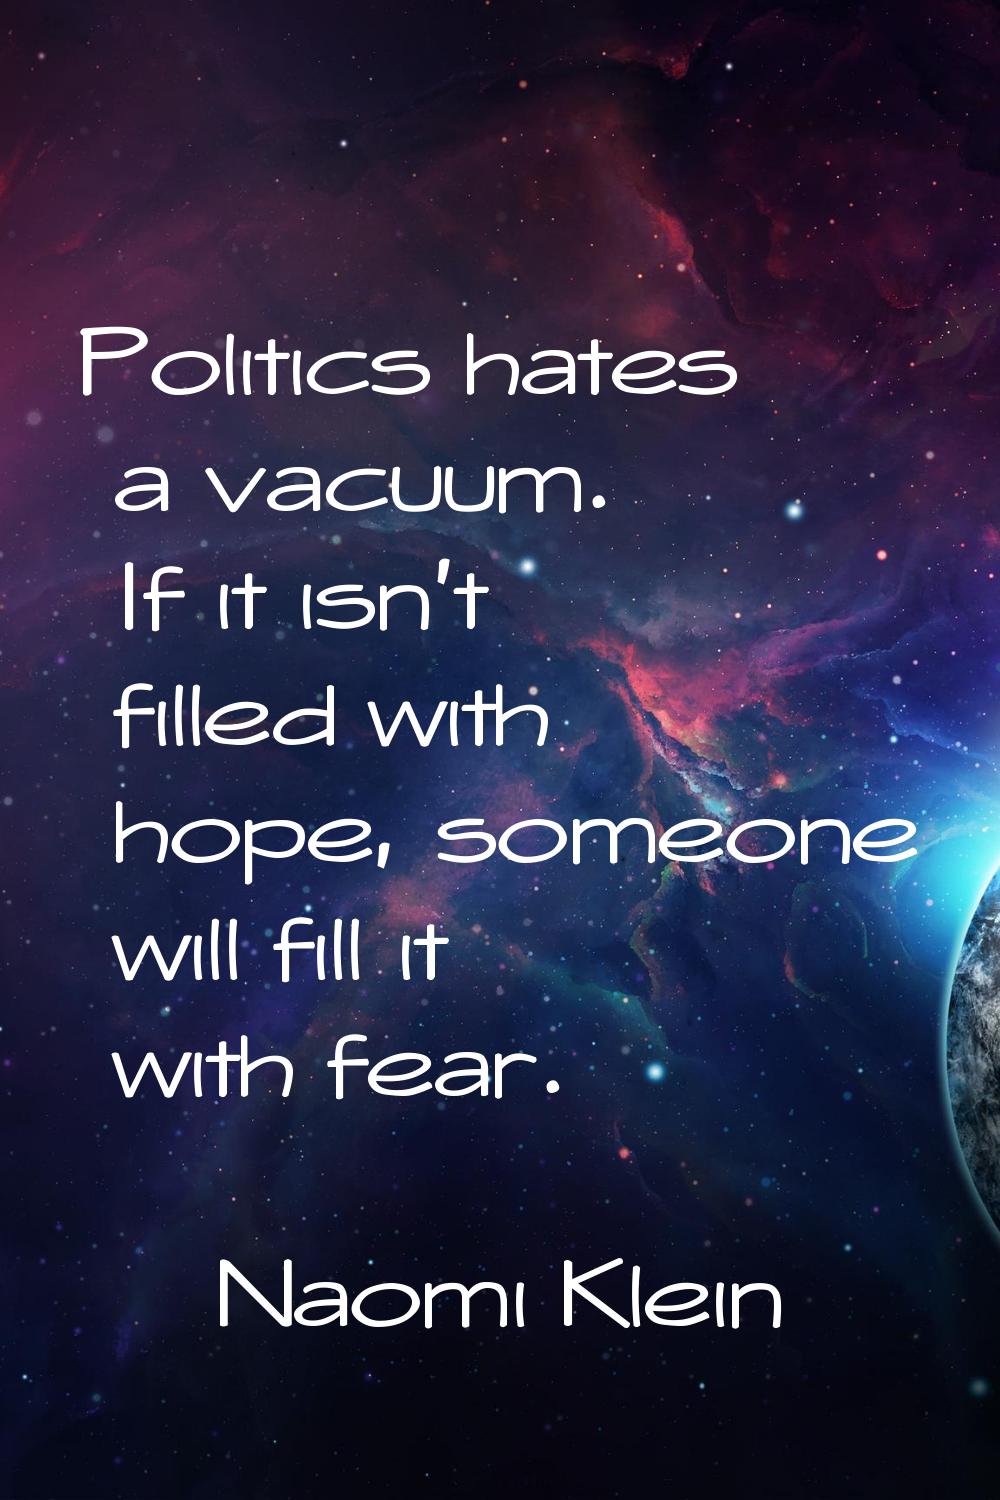 Politics hates a vacuum. If it isn't filled with hope, someone will fill it with fear.